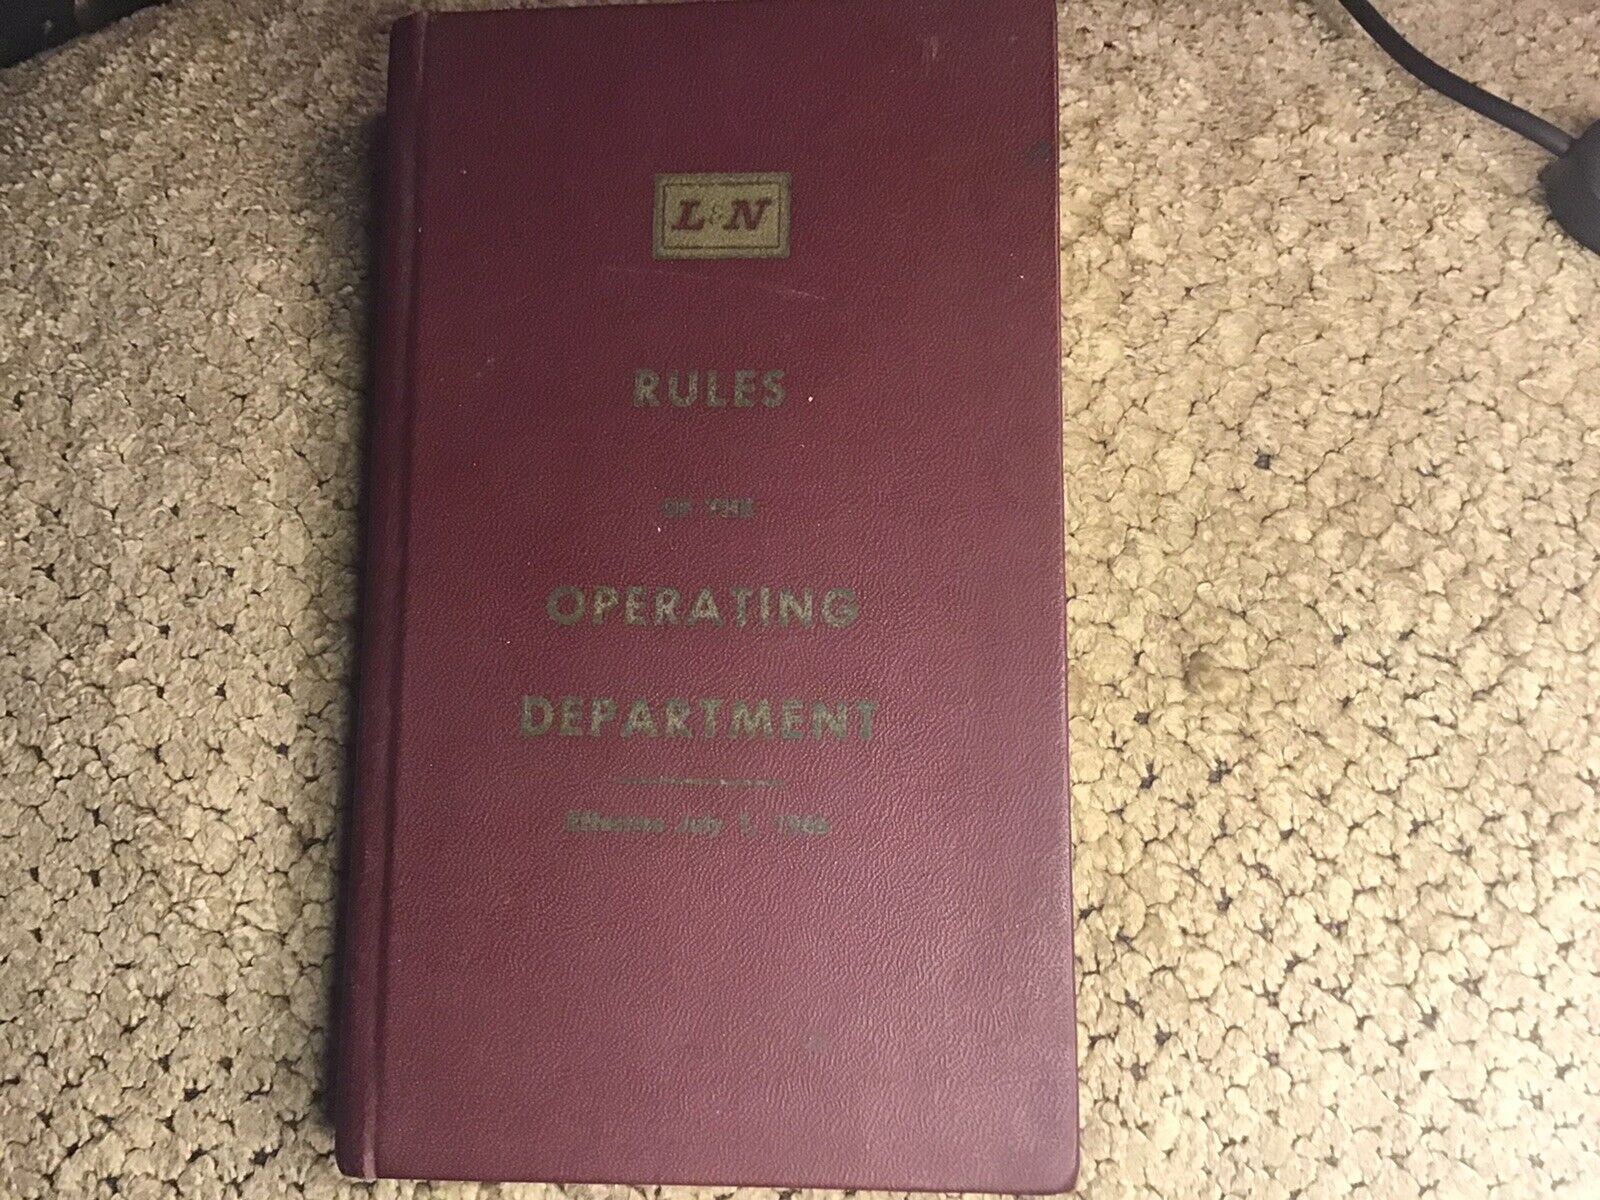 1974 L&N Railroad Company RULES OF OPERATING DEPARTMENT Rulebook Vintage